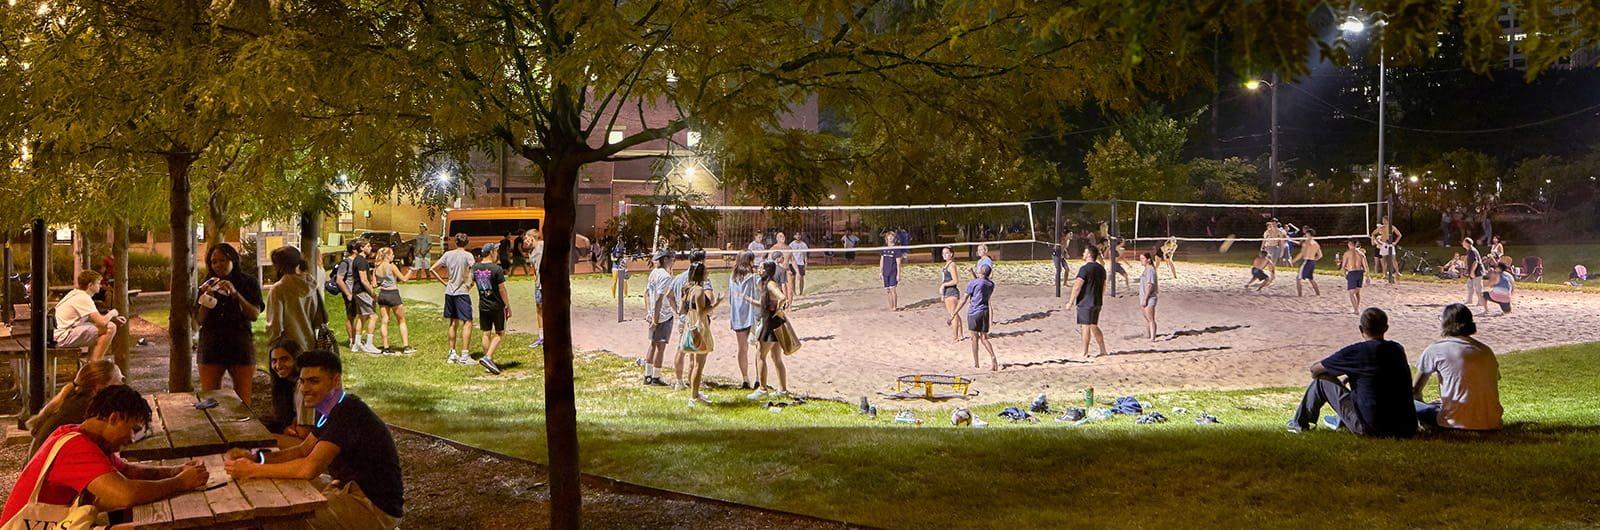 Students playing volleyball at night